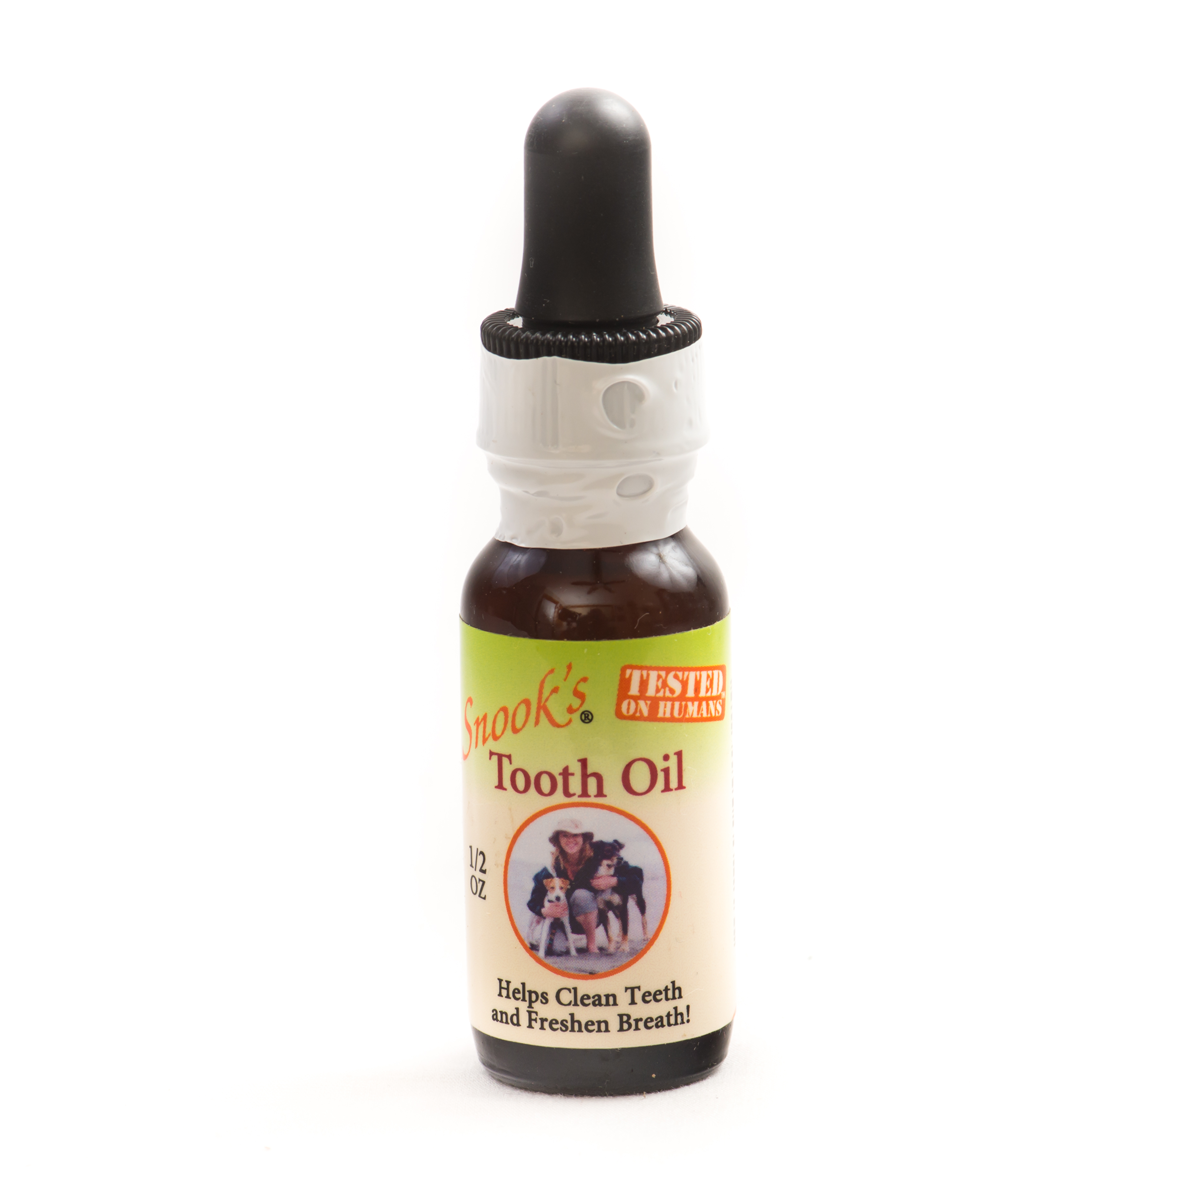 Snook's Tooth Oil